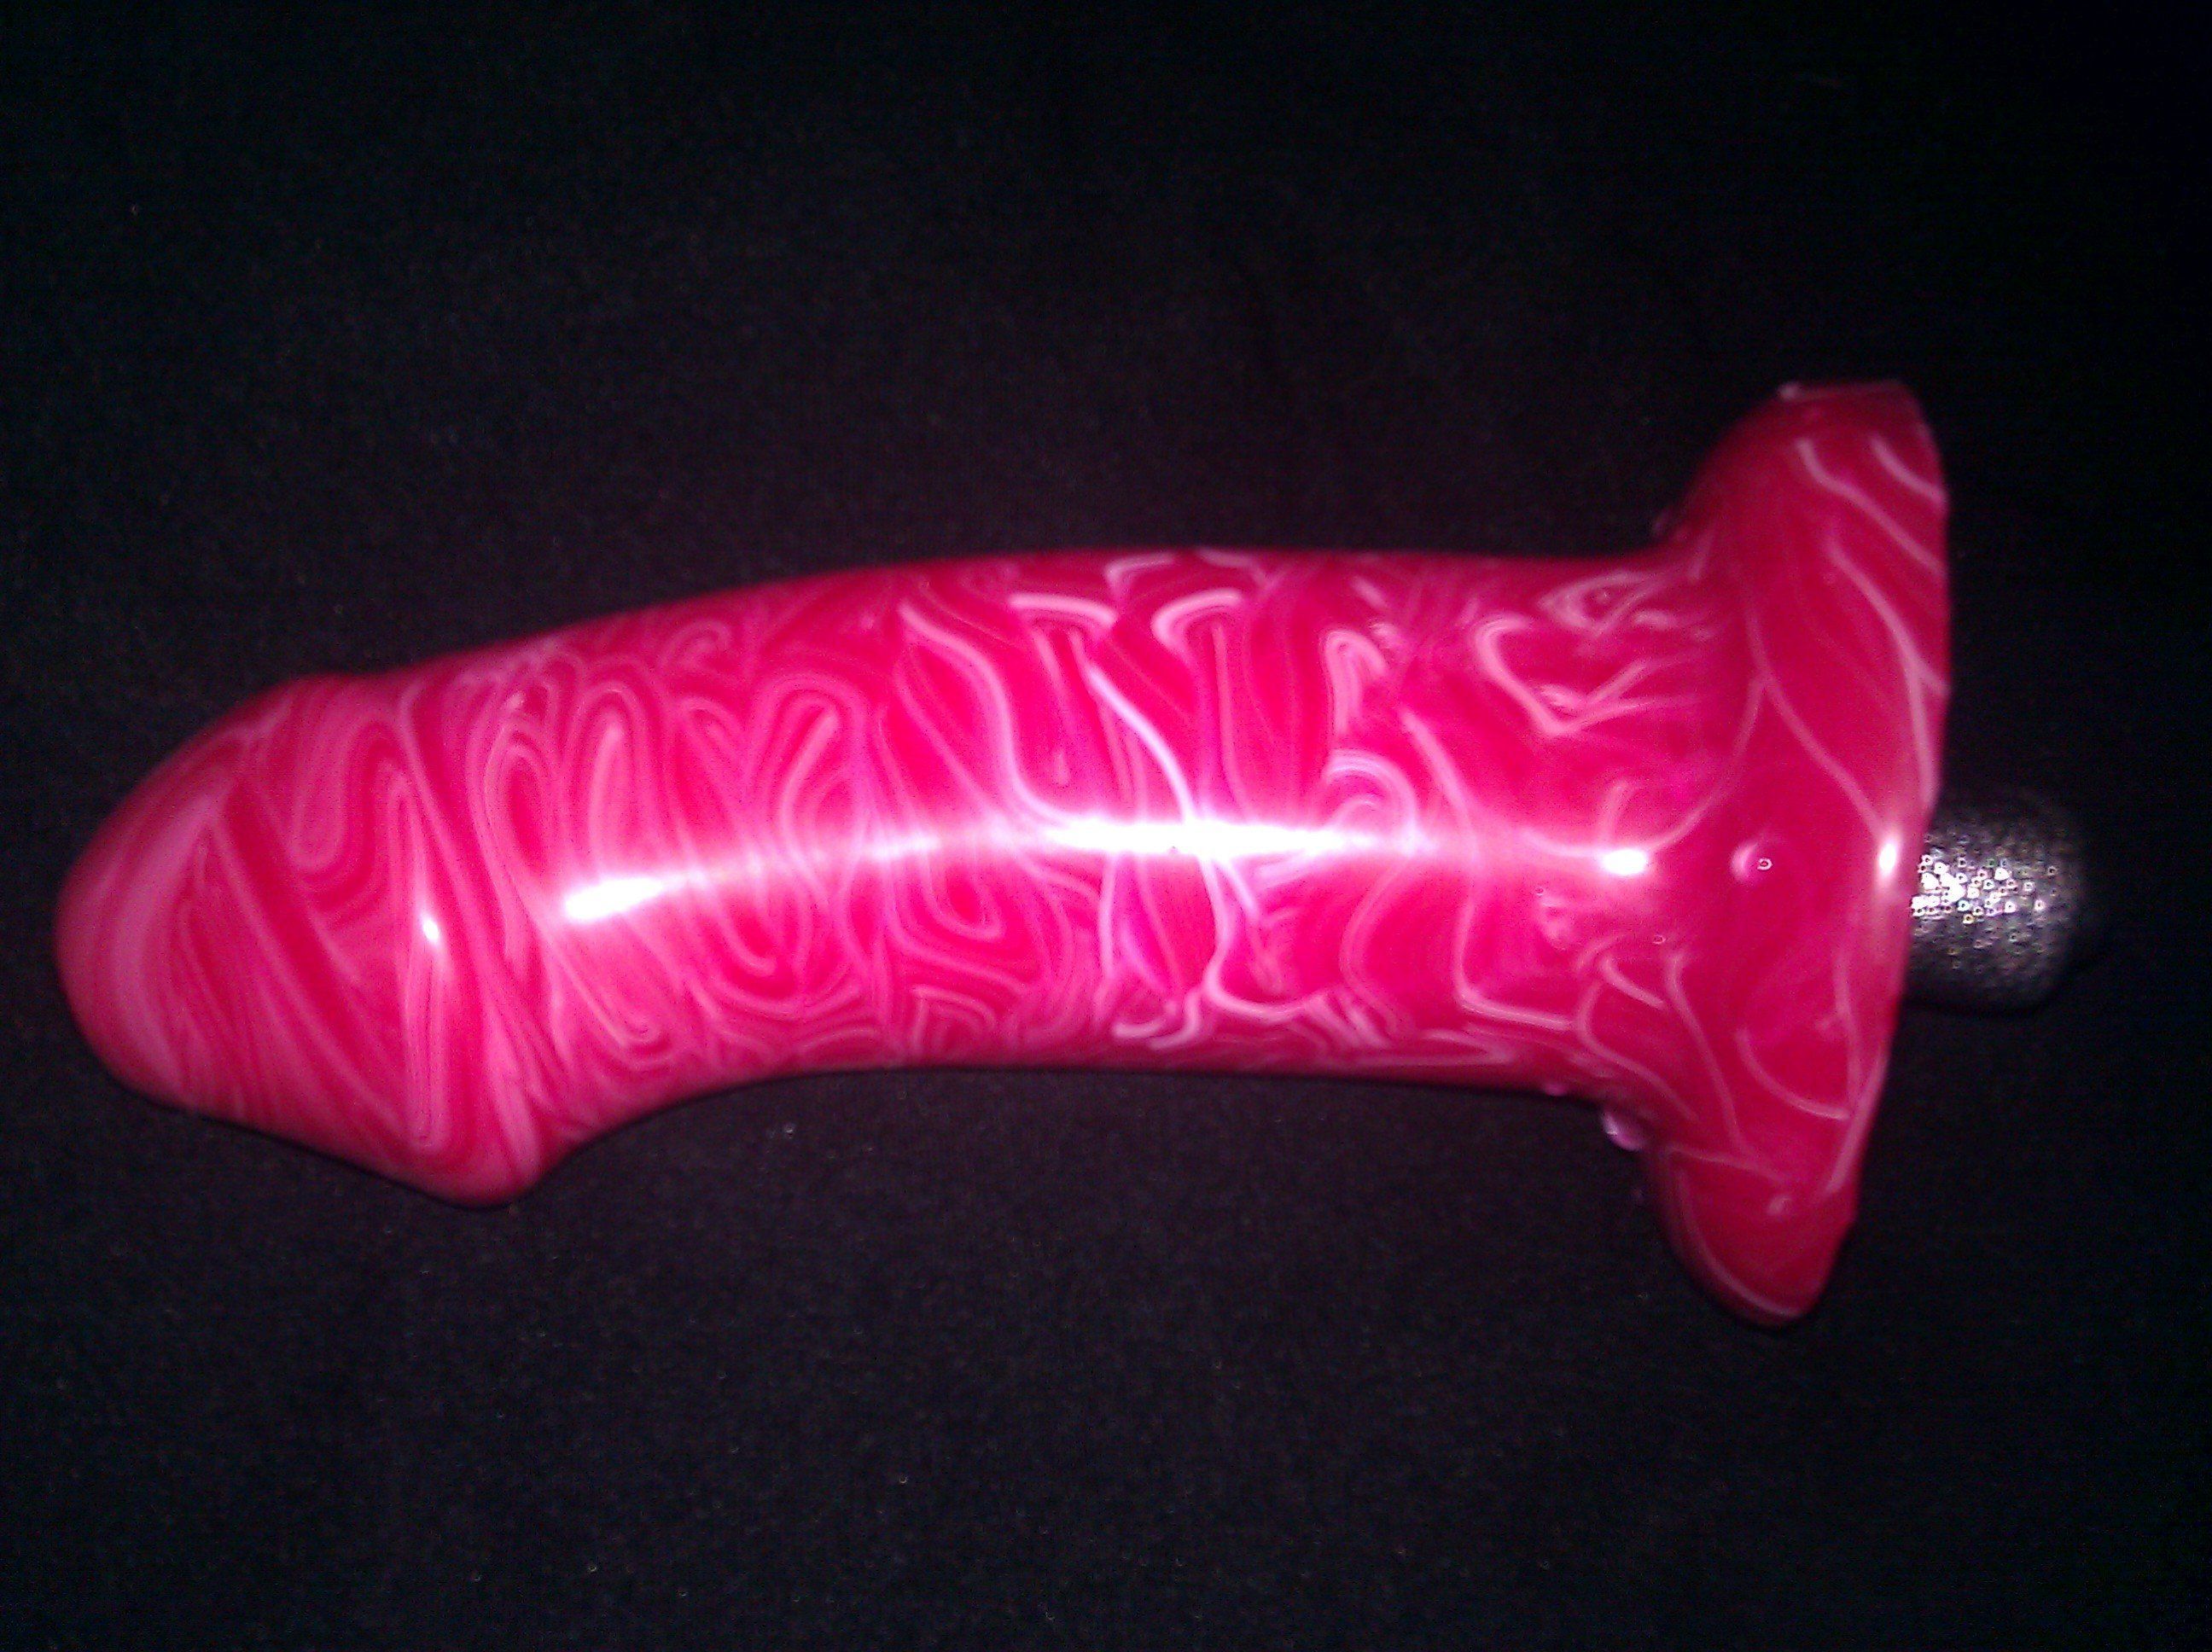 Genghis recommendet Softskin dildo vamp silicone